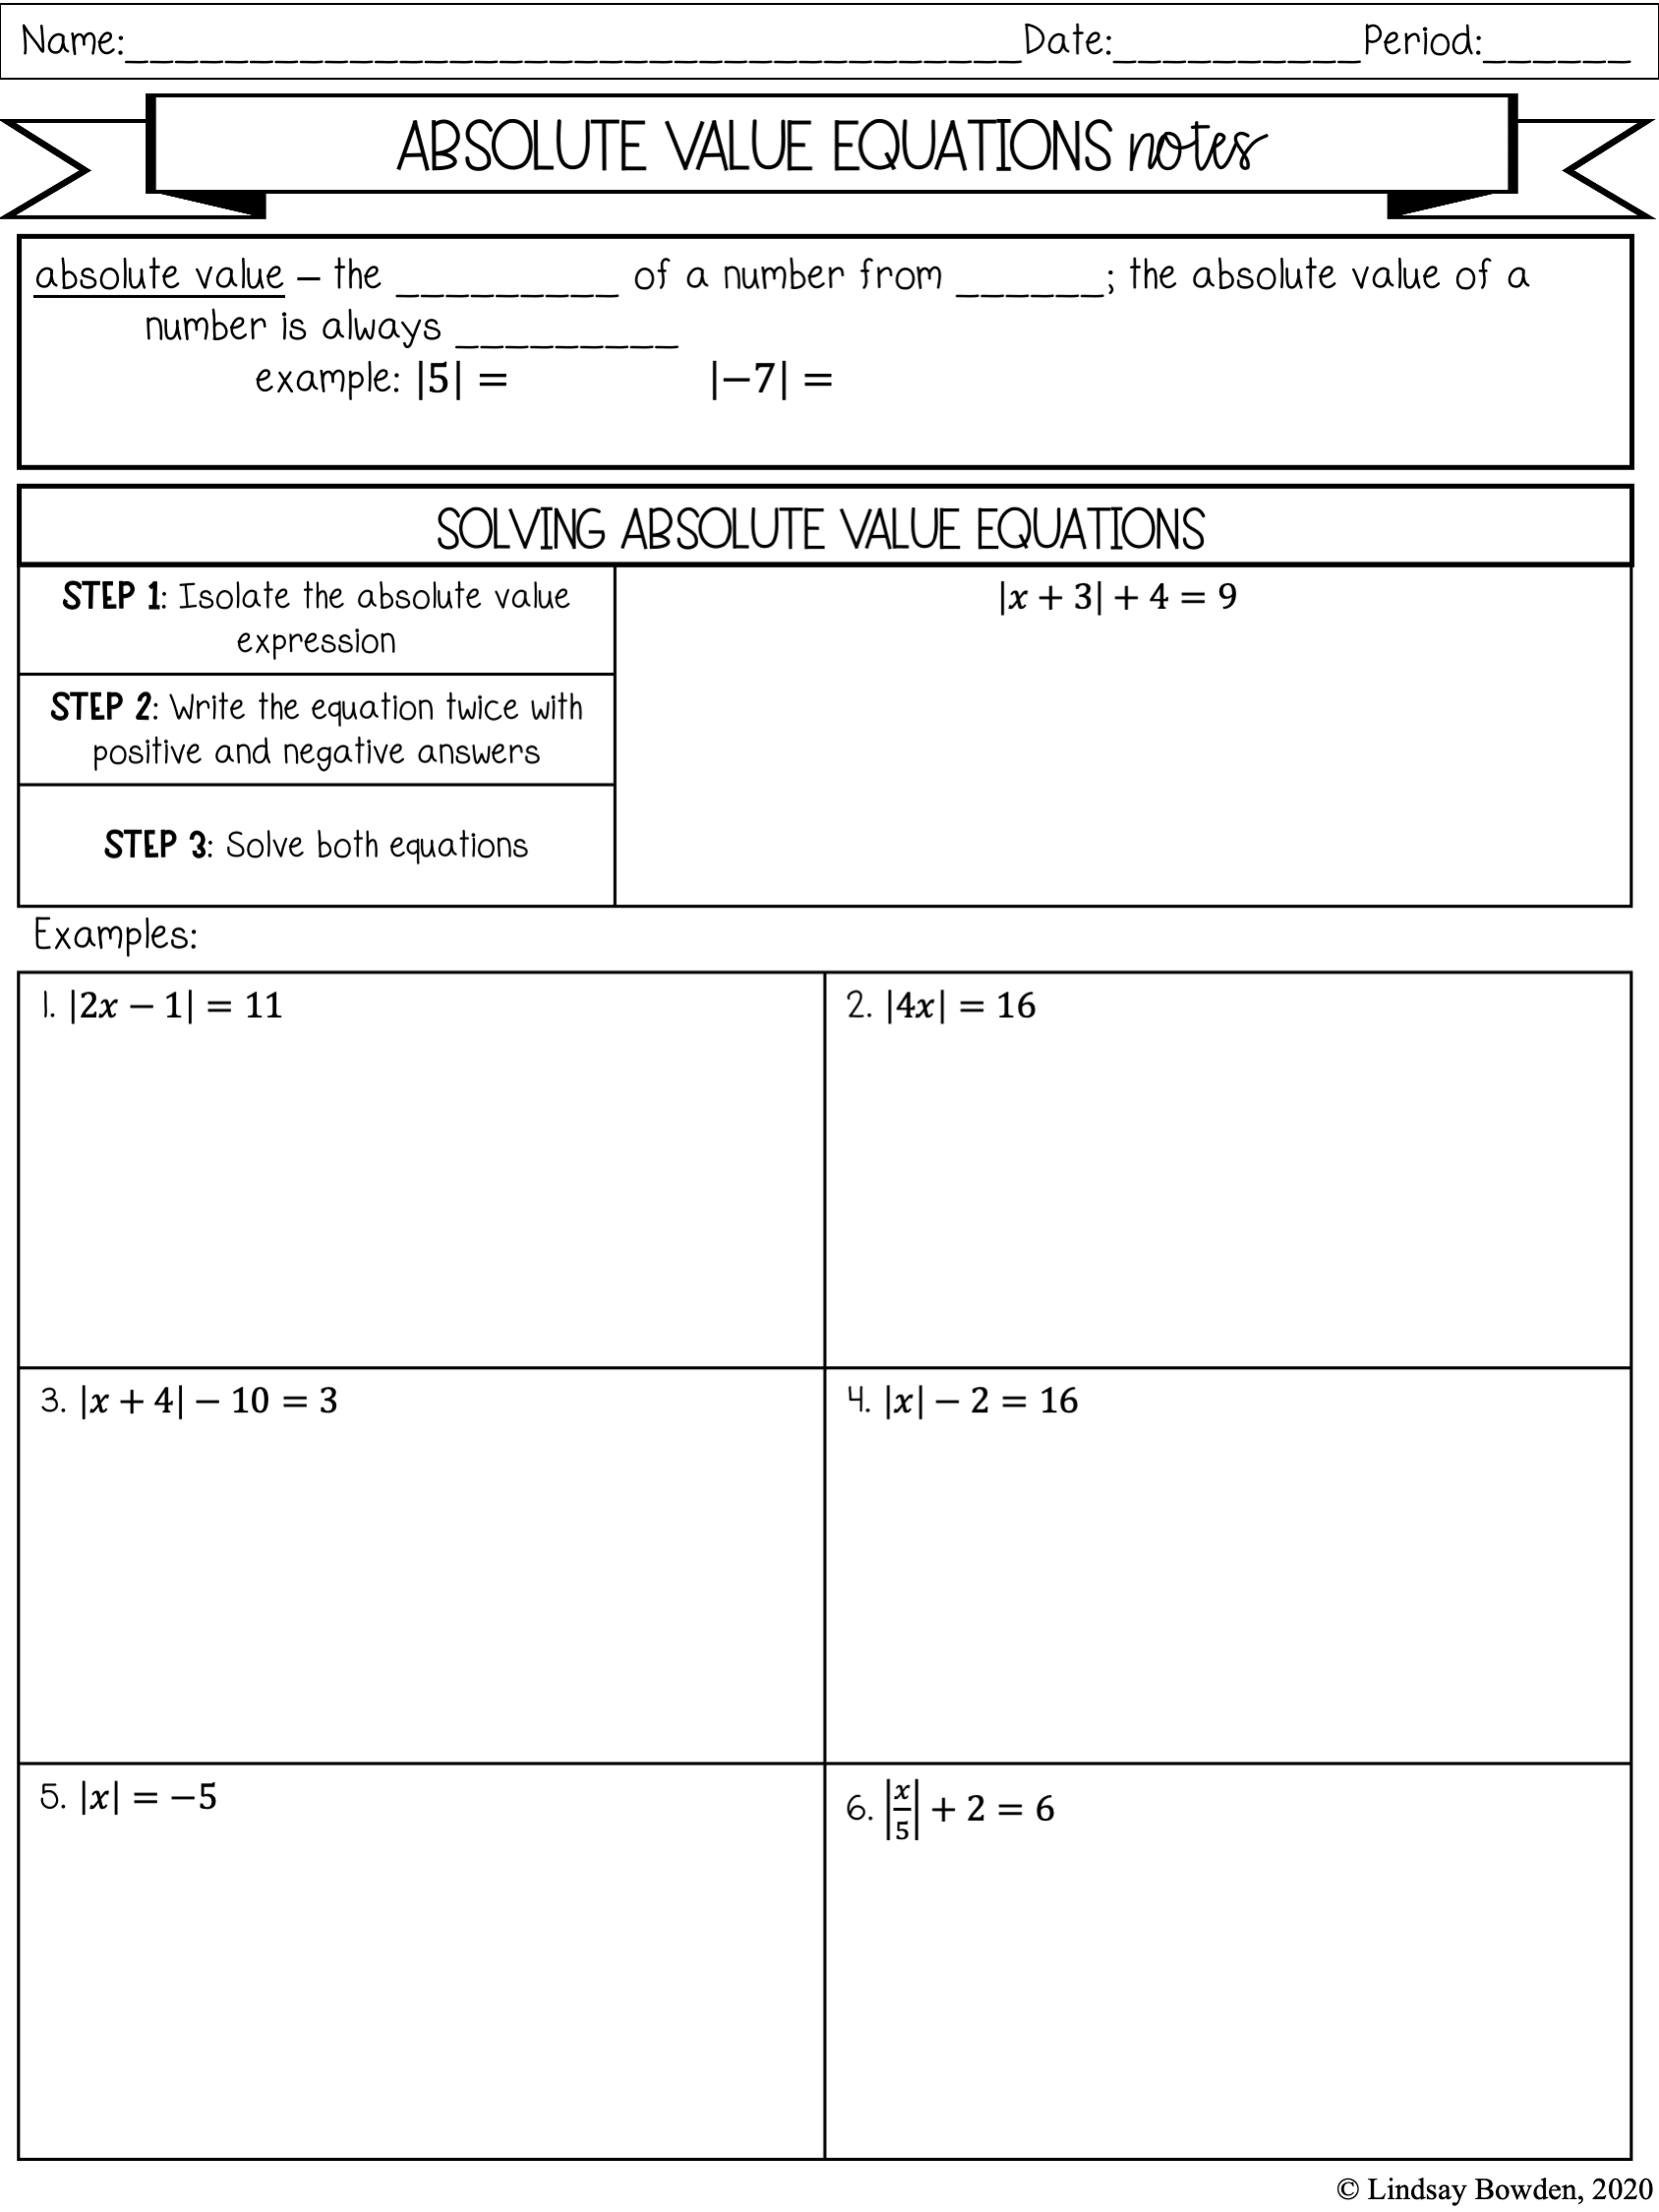 Absolute Value Notes and Worksheets - Lindsay Bowden Pertaining To Absolute Value Worksheet Pdf